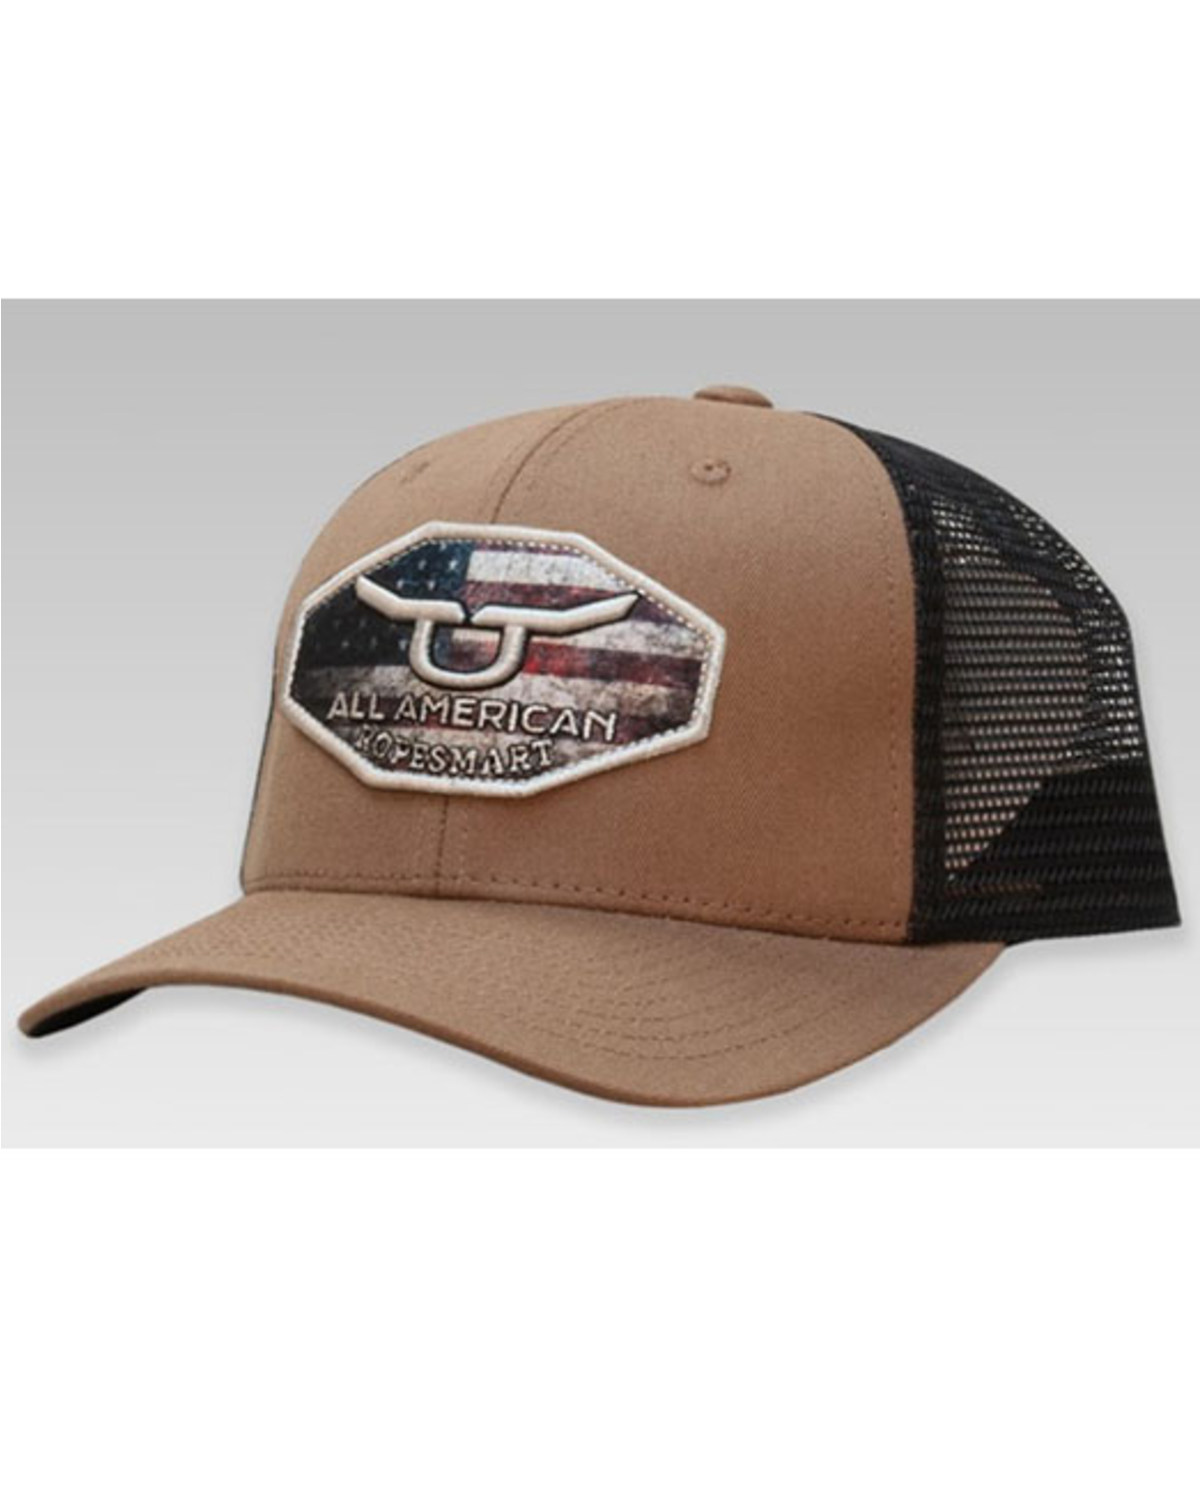 RopeSmart Men's All-American Embroidered Graphic Steer Flag Patch Mesh-Back Ball Cap